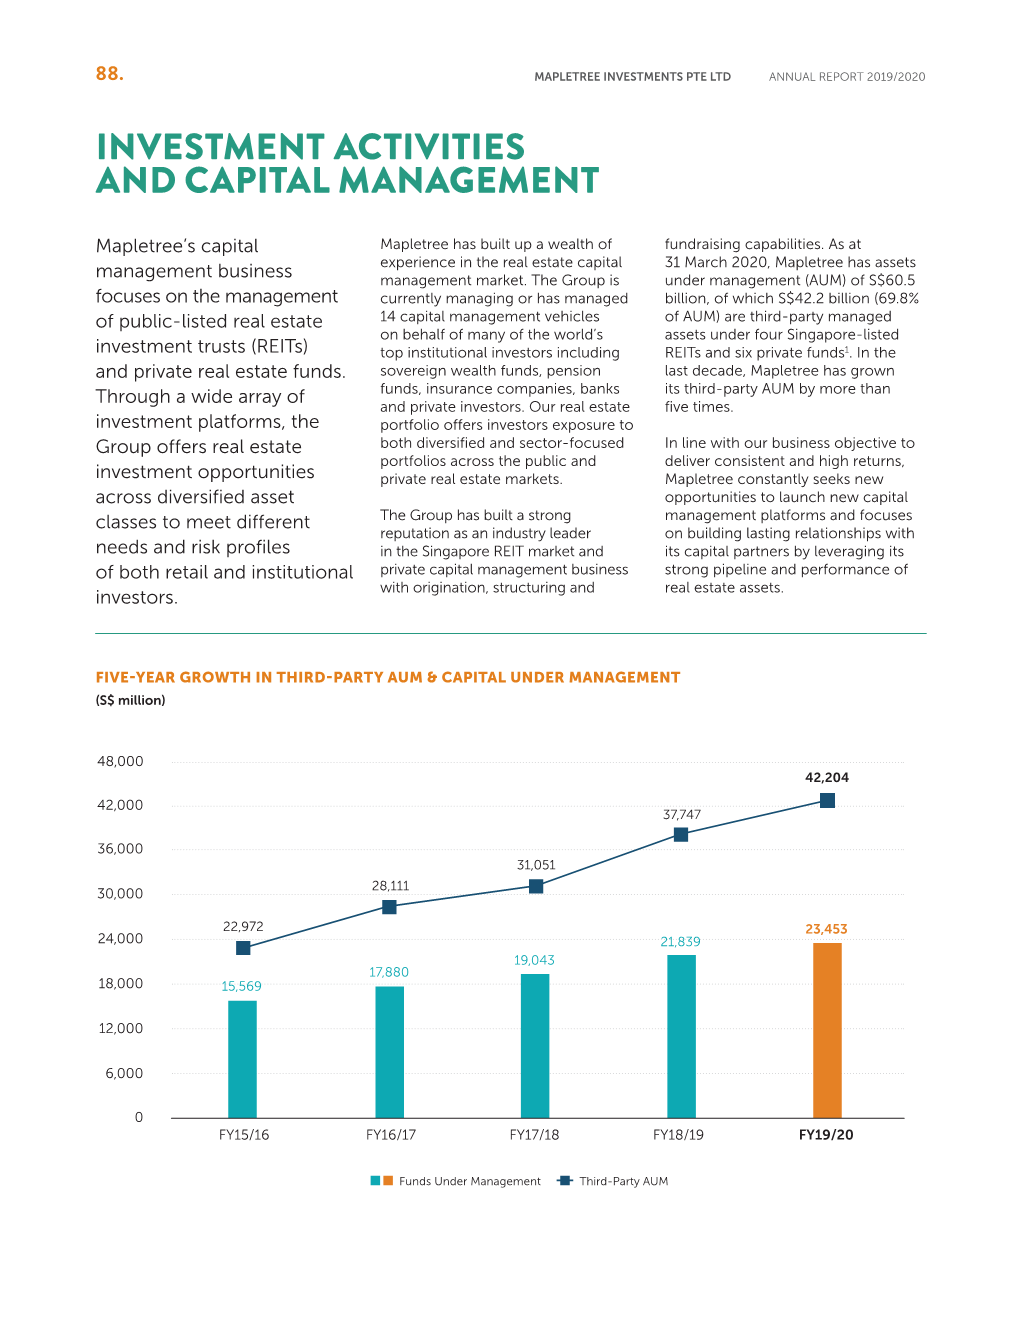 Investment Activities and Capital Management